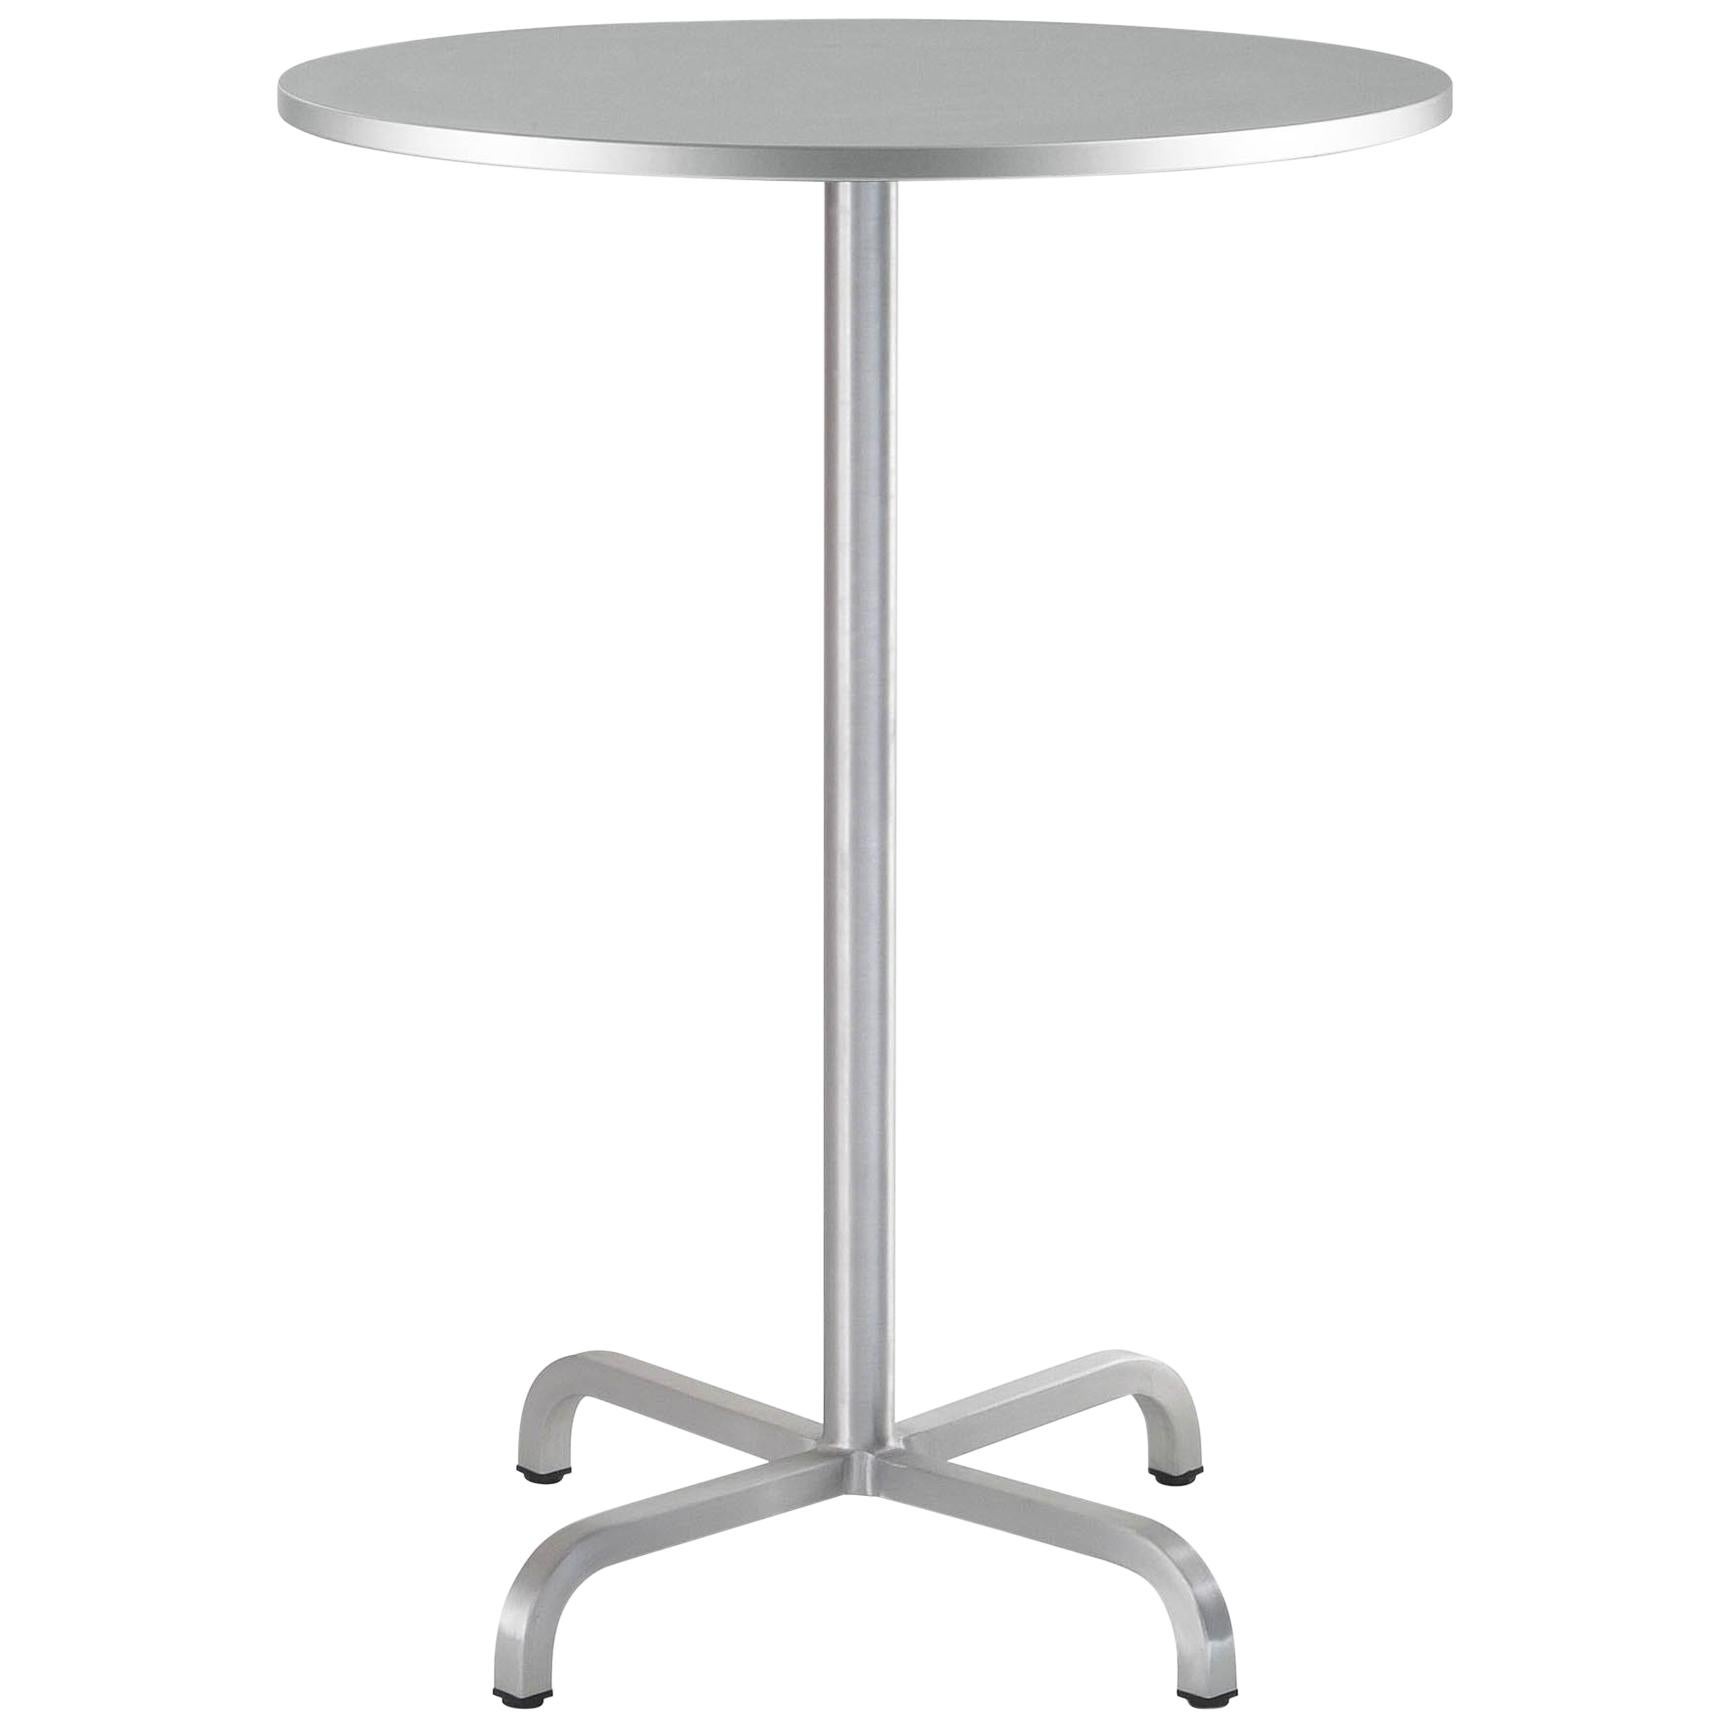 Emeco 20-06 Large Round Bar Table with Gray Laminate Top by Norman Foster For Sale